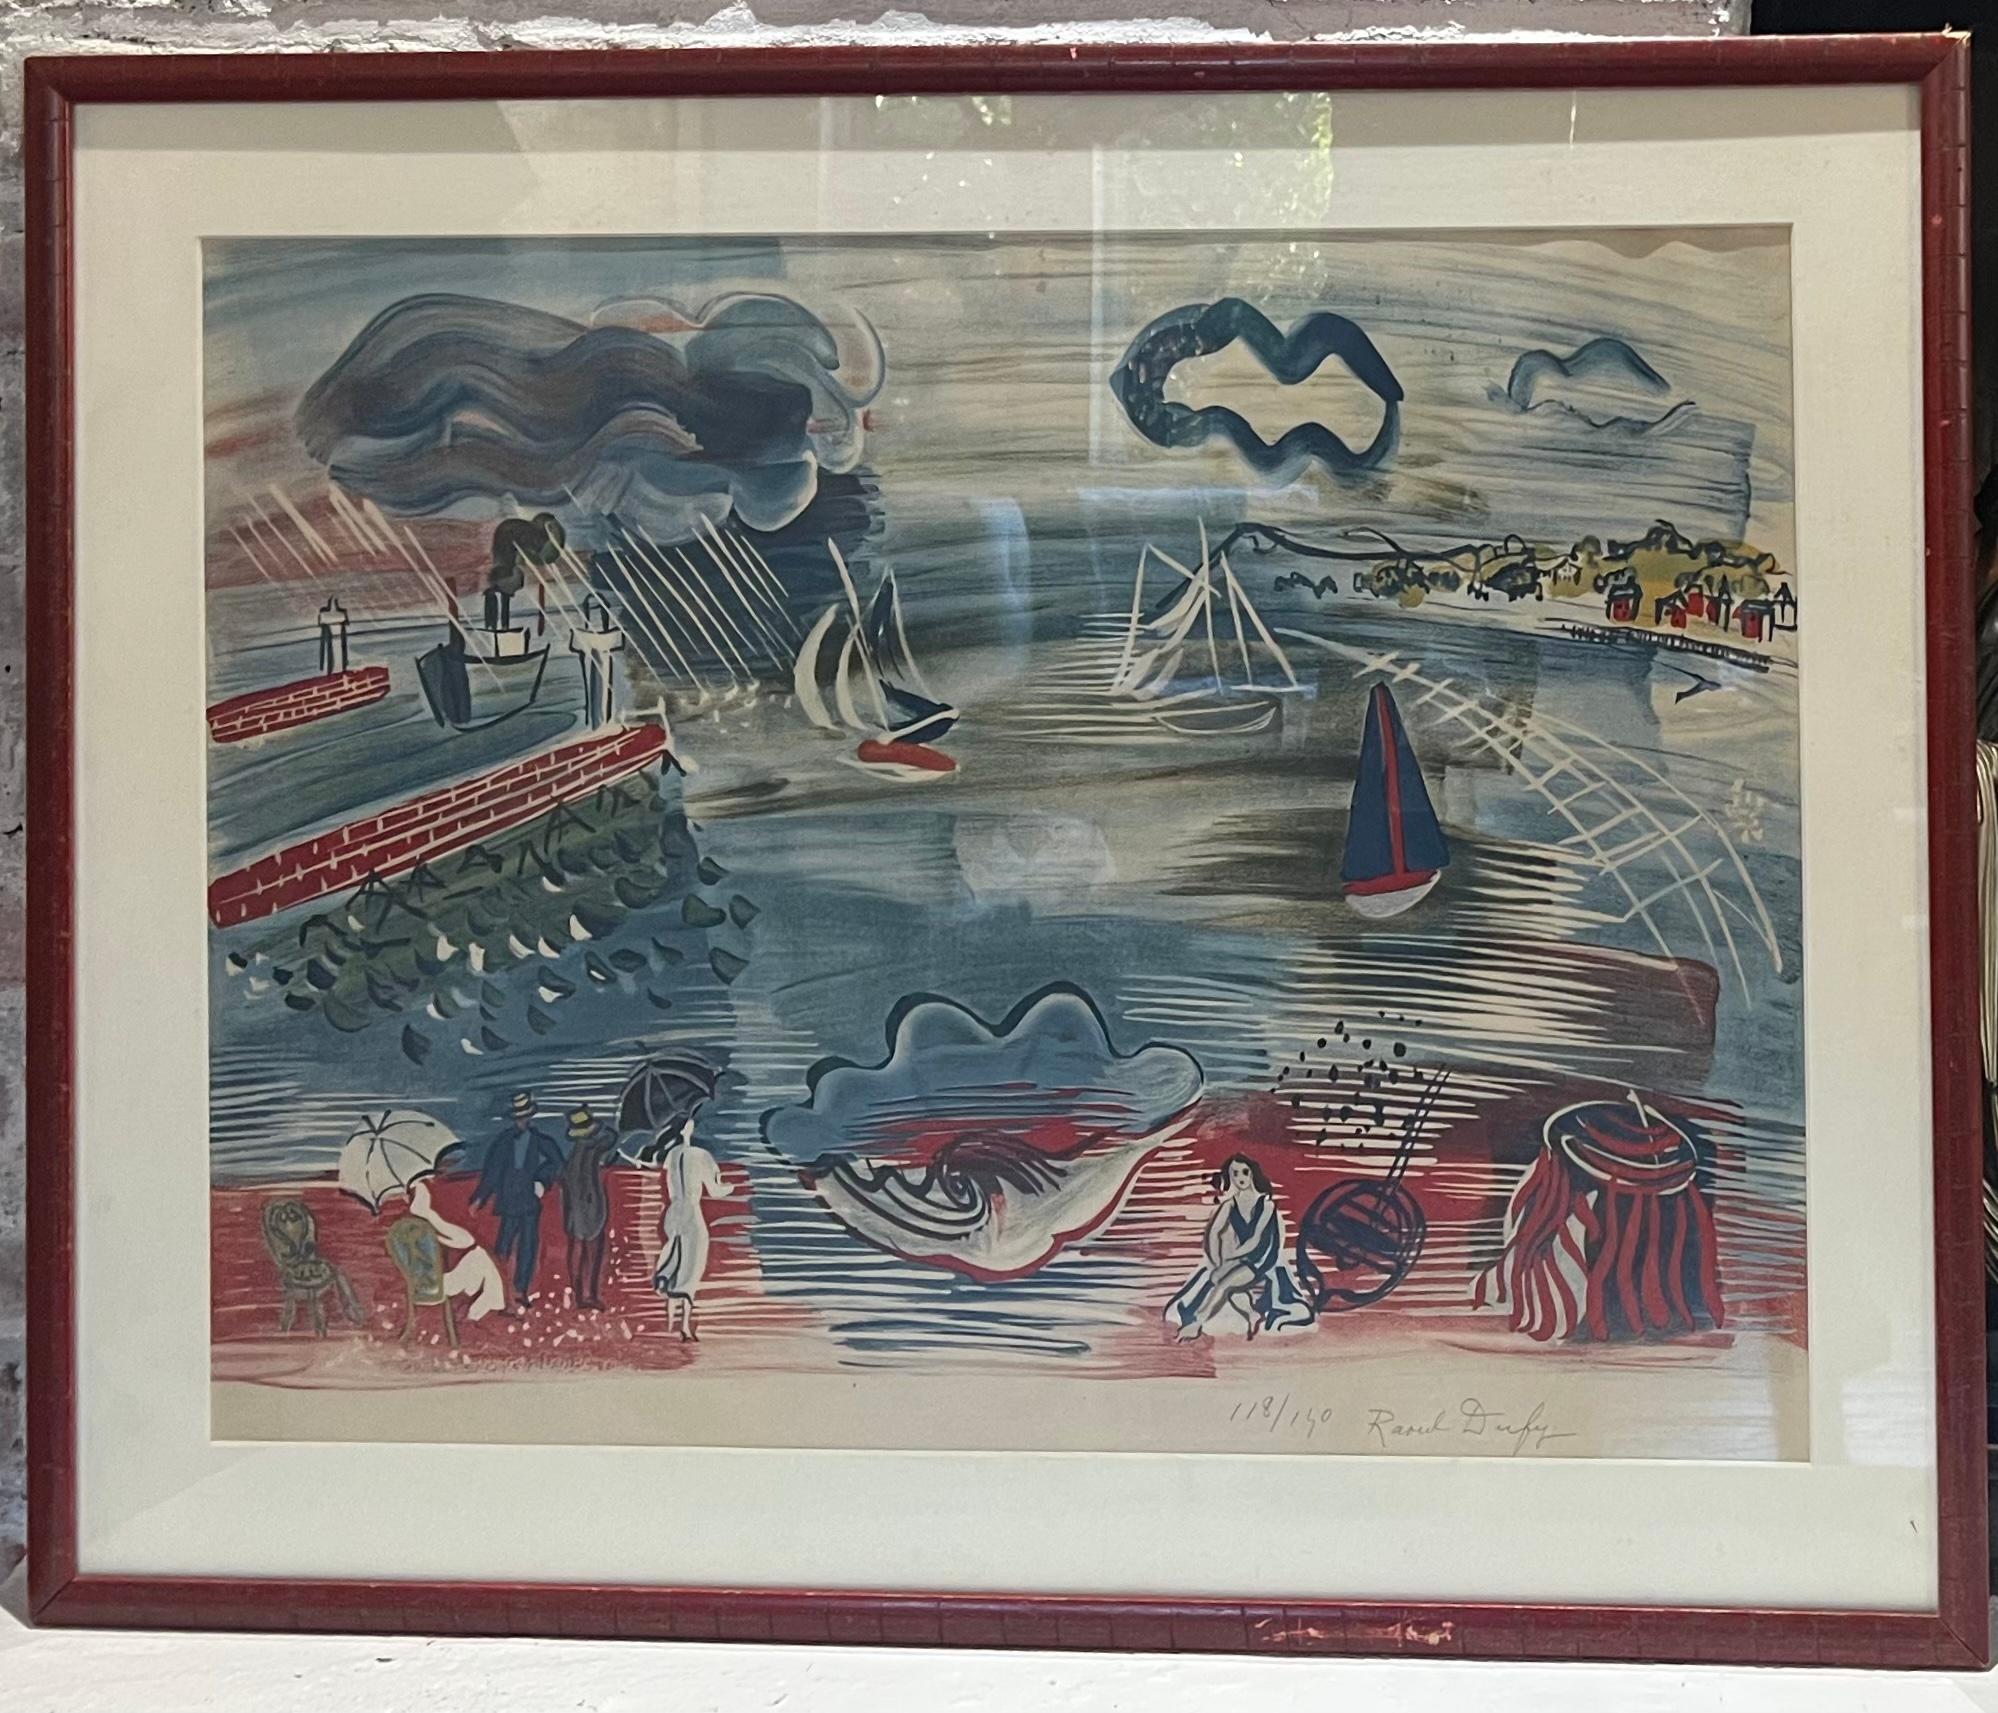 LOWEST $ DIB Post Impressionist “LE HAVRE” Lithograph 1930 Figures and Seascrape - Print by Raoul Dufy